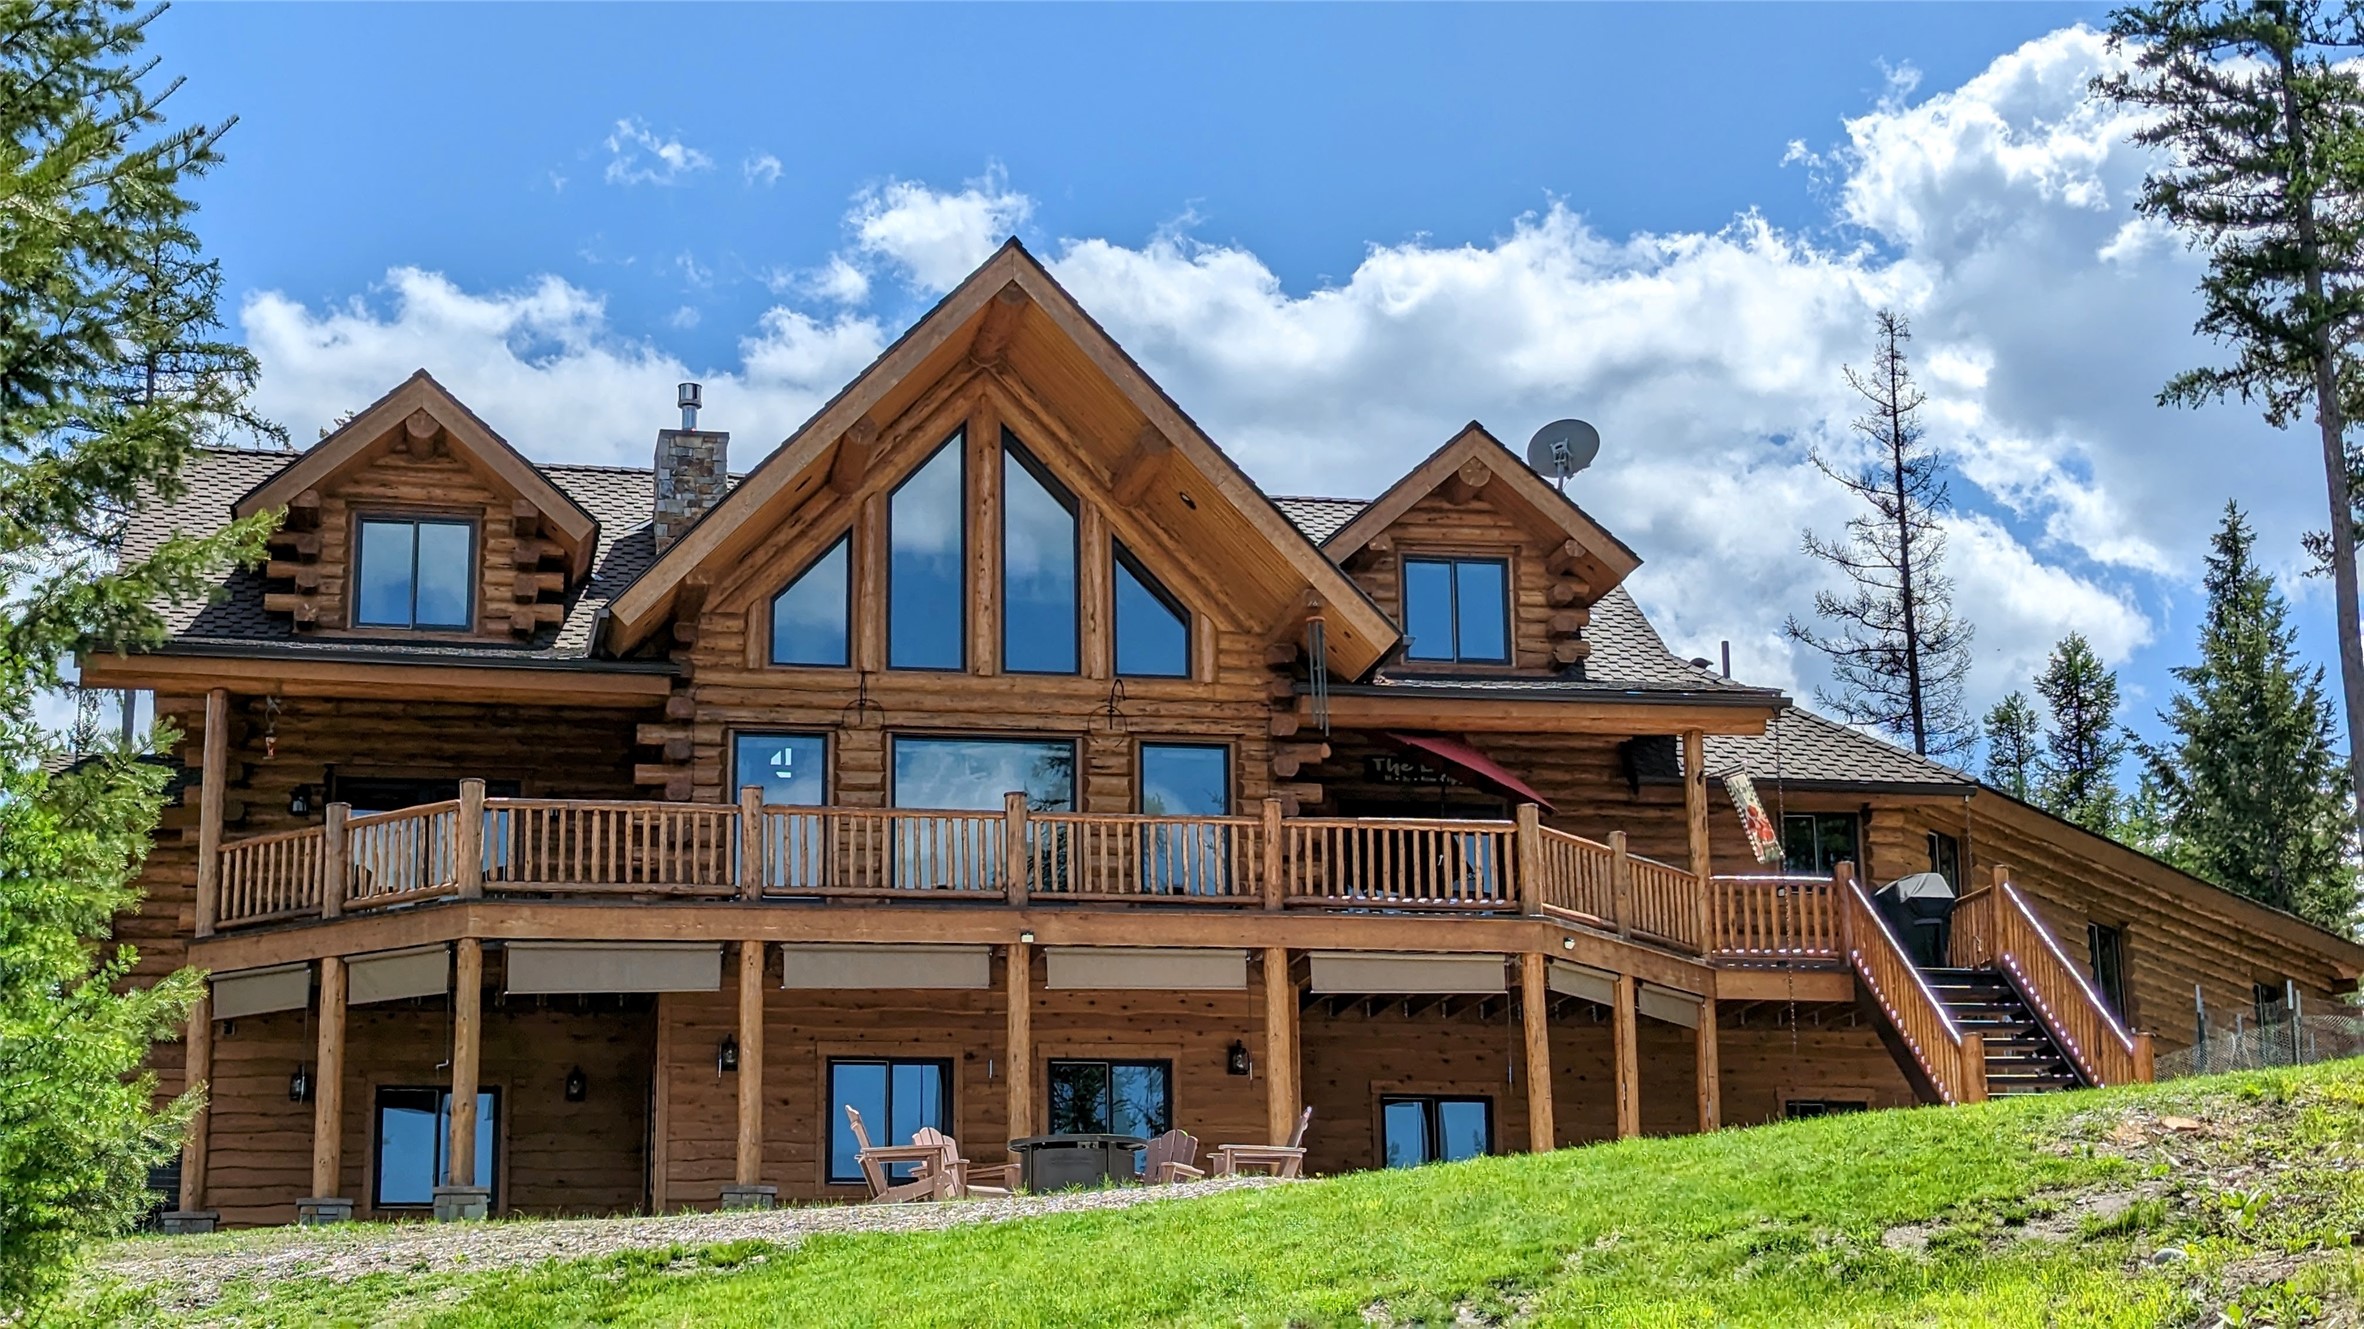 Offered is a stunning 3 bedroom, 3.5 bathroom, 4306 sq ft home on 8.75 acres with breathtaking mountain views of Bitterroot lake and the lush surrounding forest. This 2017 Meadowlark custom built log home highlights the impeccable attention to detail and craftsmanship of the traditional Amish techniques, that truly make it one of a kind. This immaculate home includes all remaining hand selected custom interior furniture, appealing to the most discerning buyers. The majesty of nature is ever-present as each window brings the outdoors in, providing a seamless blend of indoor and outdoor living. With professional landscaping, private gated entry and paved driveway, this unique property is truly the pinnacle of luxury living. Recent improvements include a spacious 52'x30' shop space for your toy and storage needs and a new outdoor 2400 sq ft patio fire pit space for entertaining guests and making memories! This property has it all, Escape to Marion, Montana and make your dreams a reality. Listed by Eric Perlstein/Brandon Trust